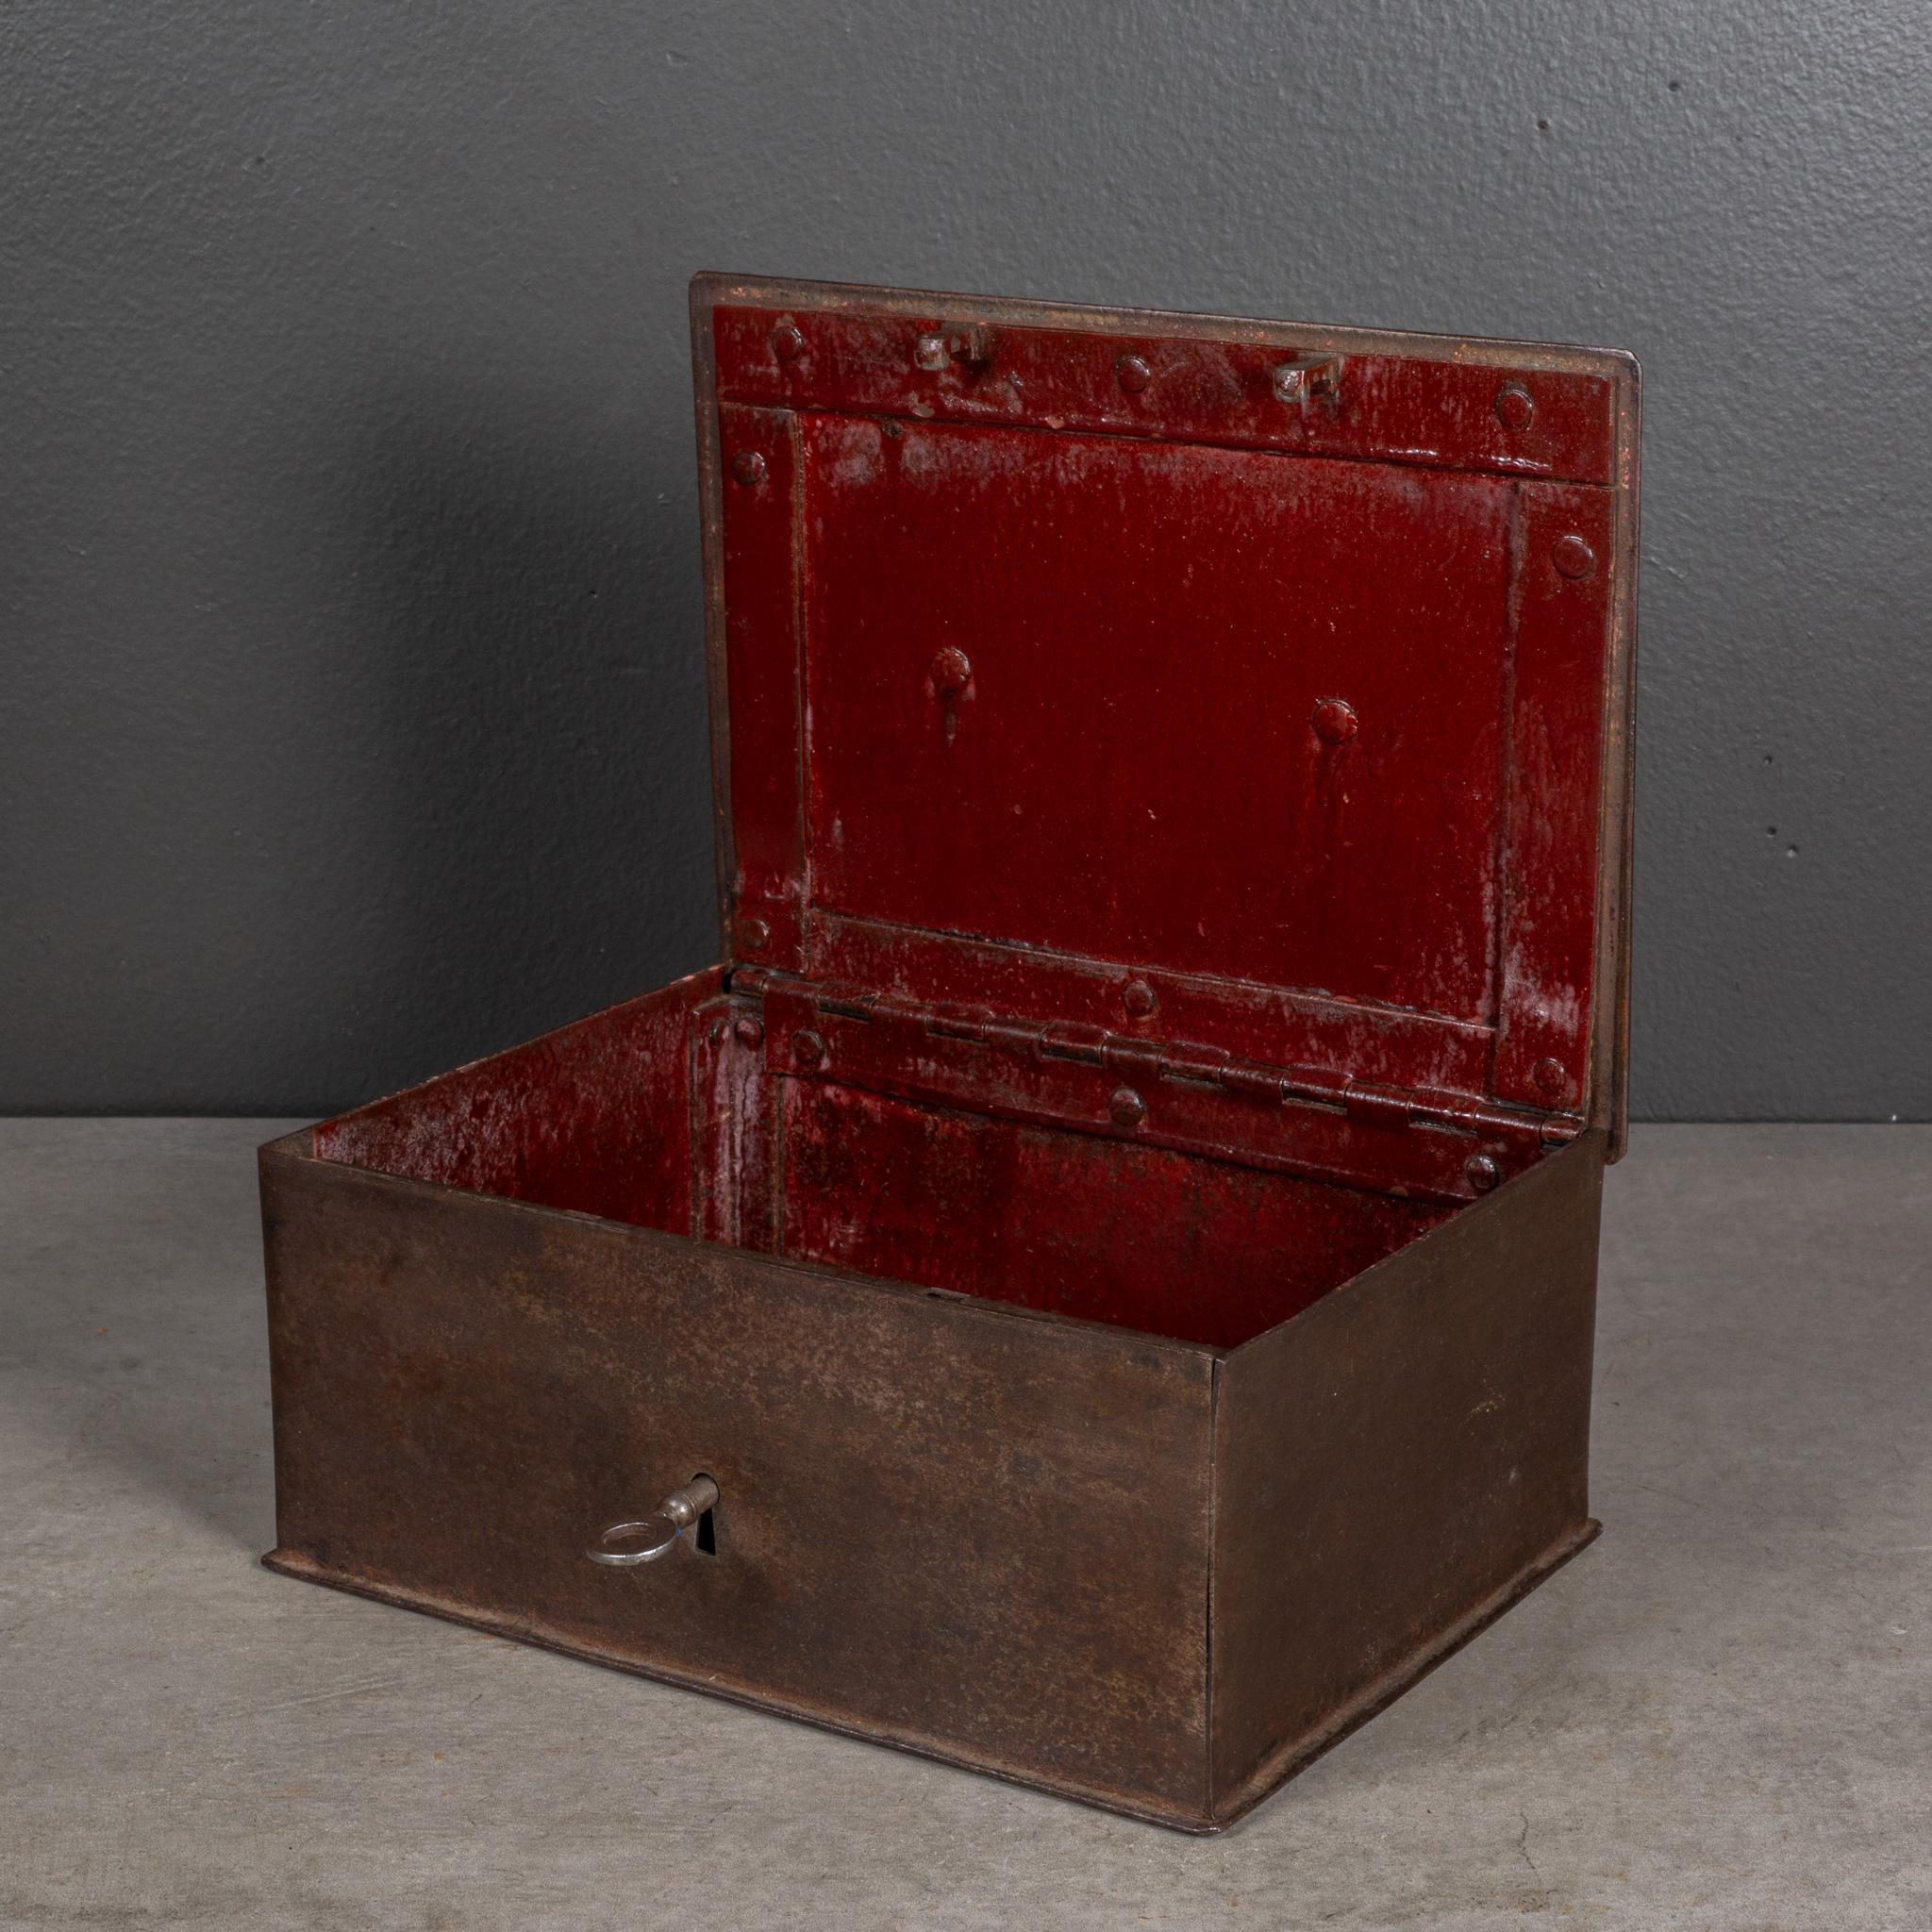 ABOUT

A 19th century metal lock box with red interior and original key. 

    CREATOR Unknown.
    DATE OF MANUFACTURE c.1800-1899. 
    MATERIALS AND TECHNIQUES Metal. 
    CONDITION Good. Wear consistent with age and use. 
    DIMENSIONS H 3.25 W